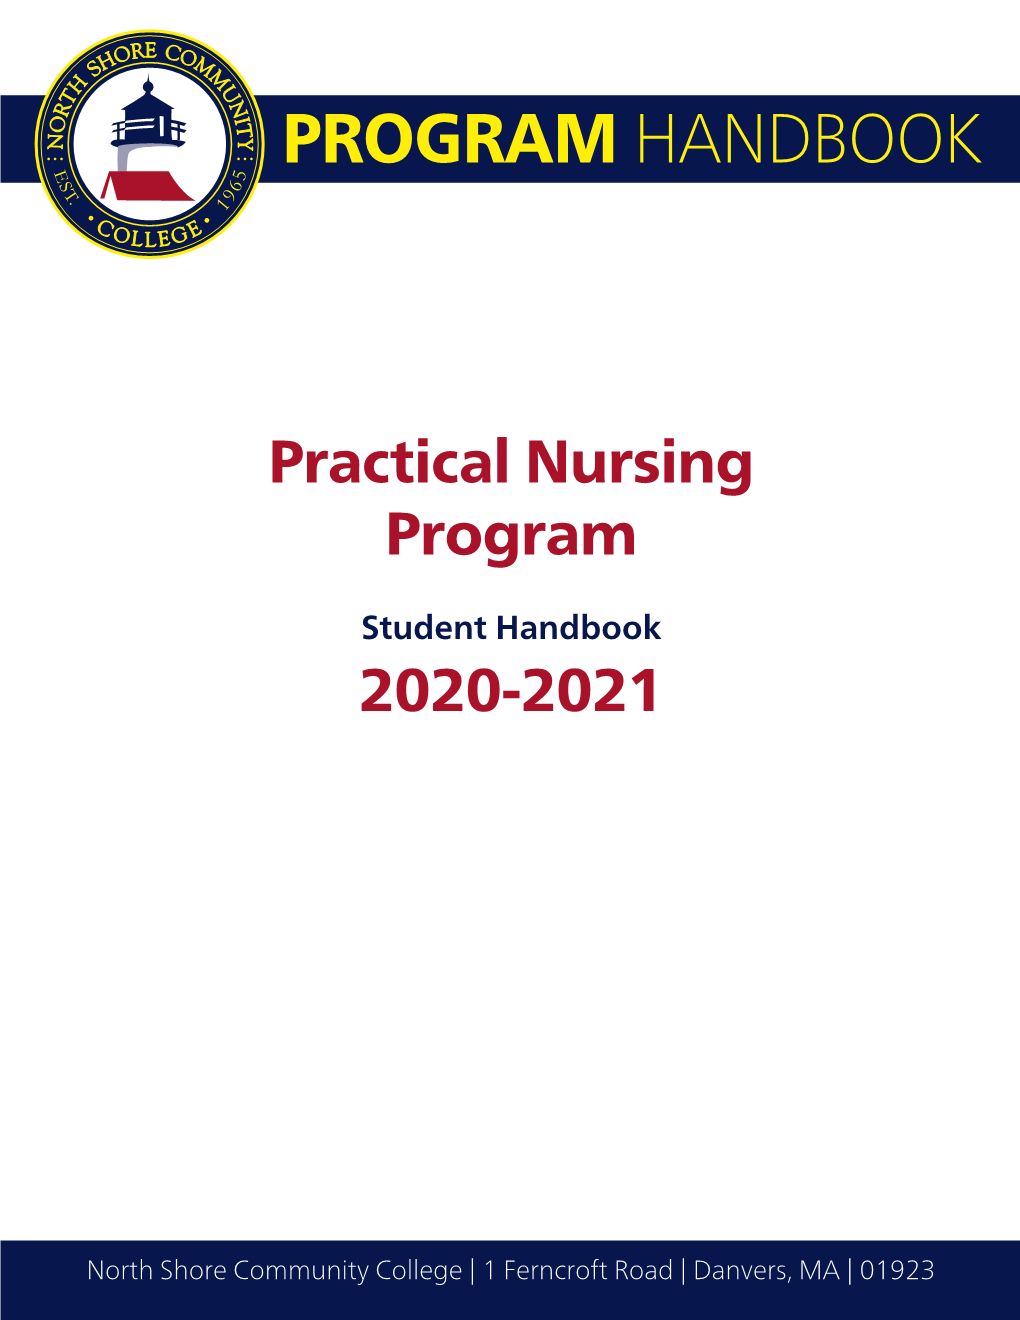 Practical Nursing Student Handbook Follow the North Shore Community College Policy Statement on Affirmative Action, Equal Opportunity, and Diversity